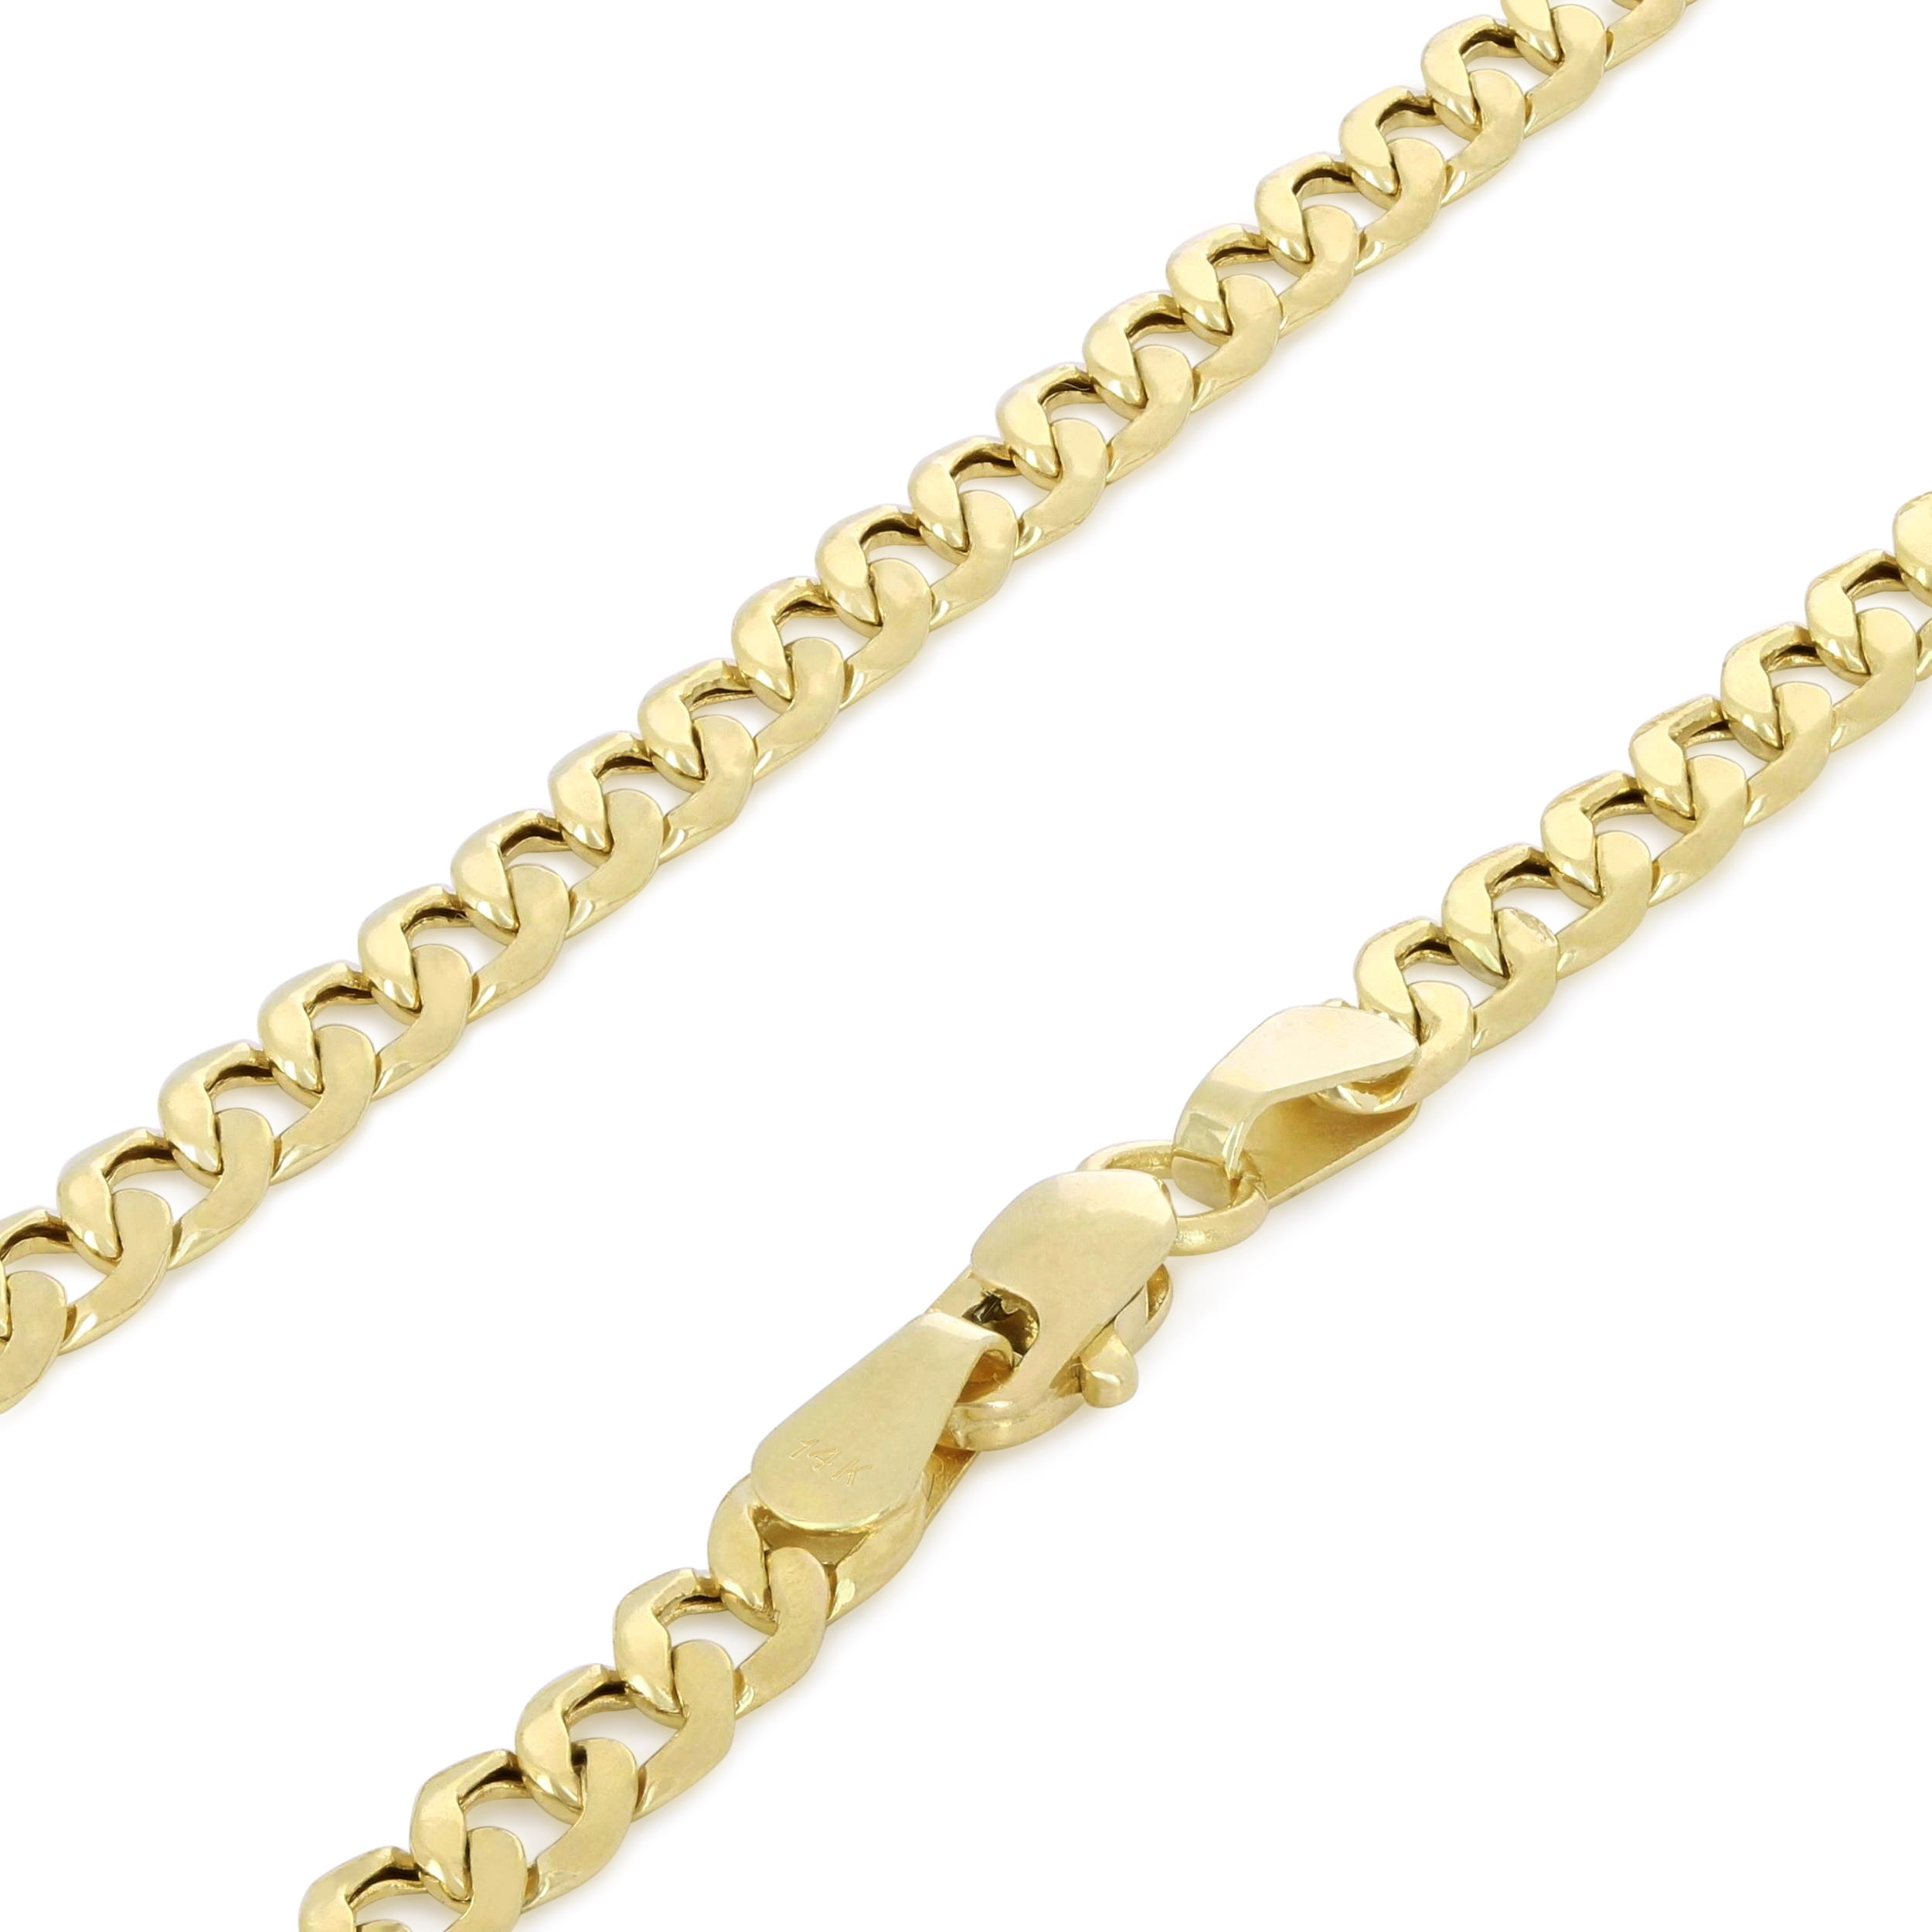 Anchor Link Women Men L 14K Solid Yellow Gold Mariner Necklace Chain 2mm 16-24" 